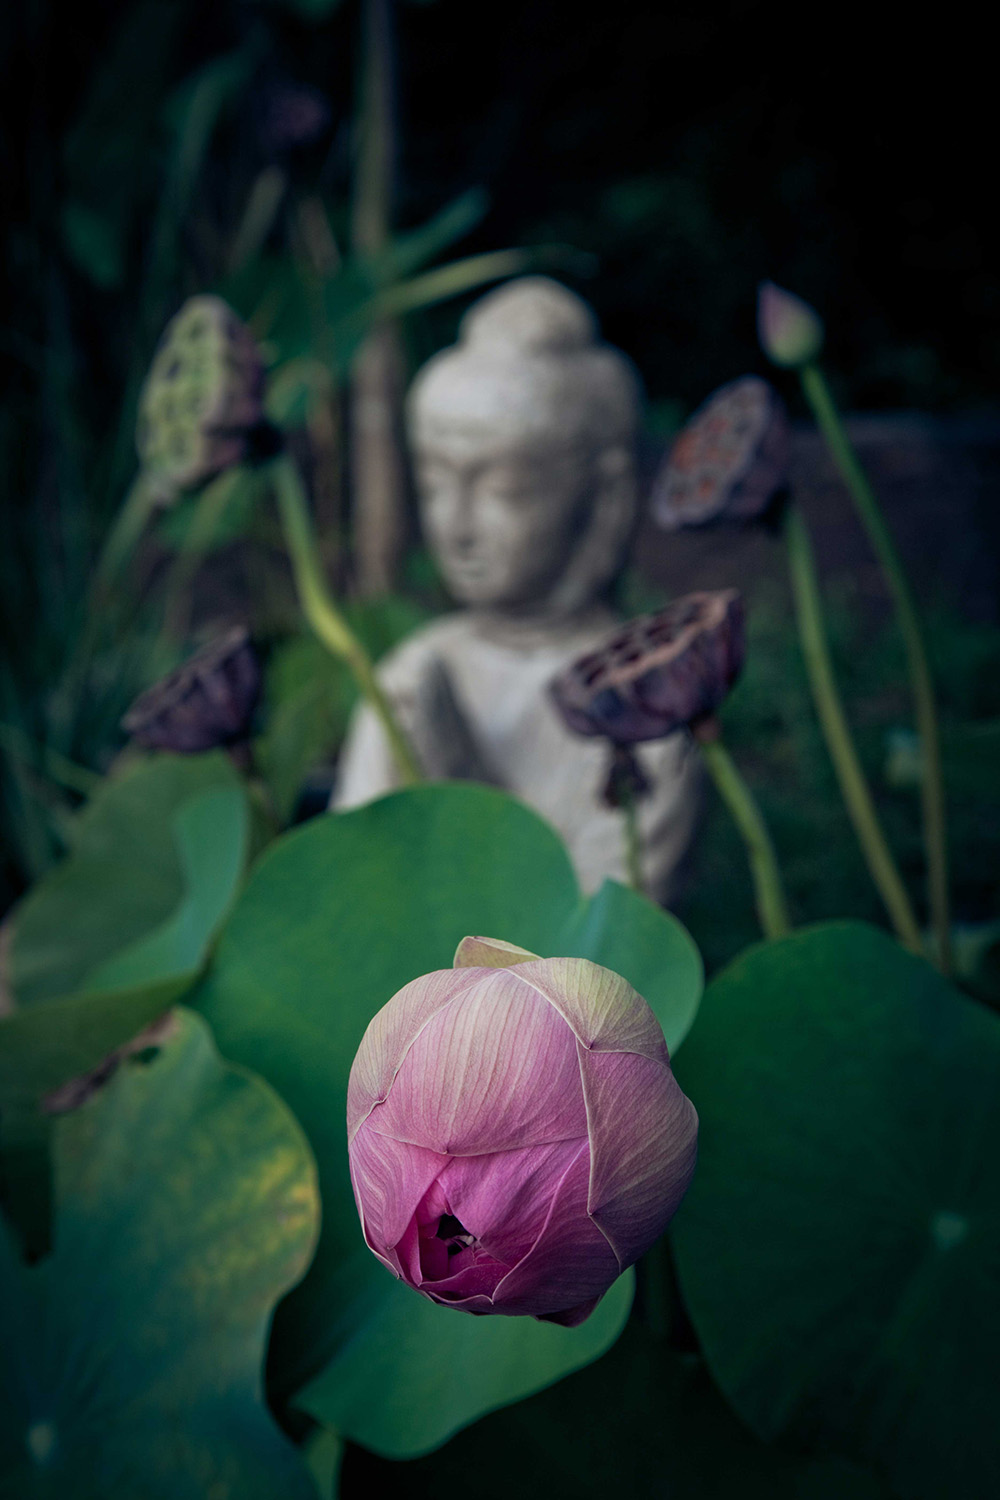 Buddah with flower in front